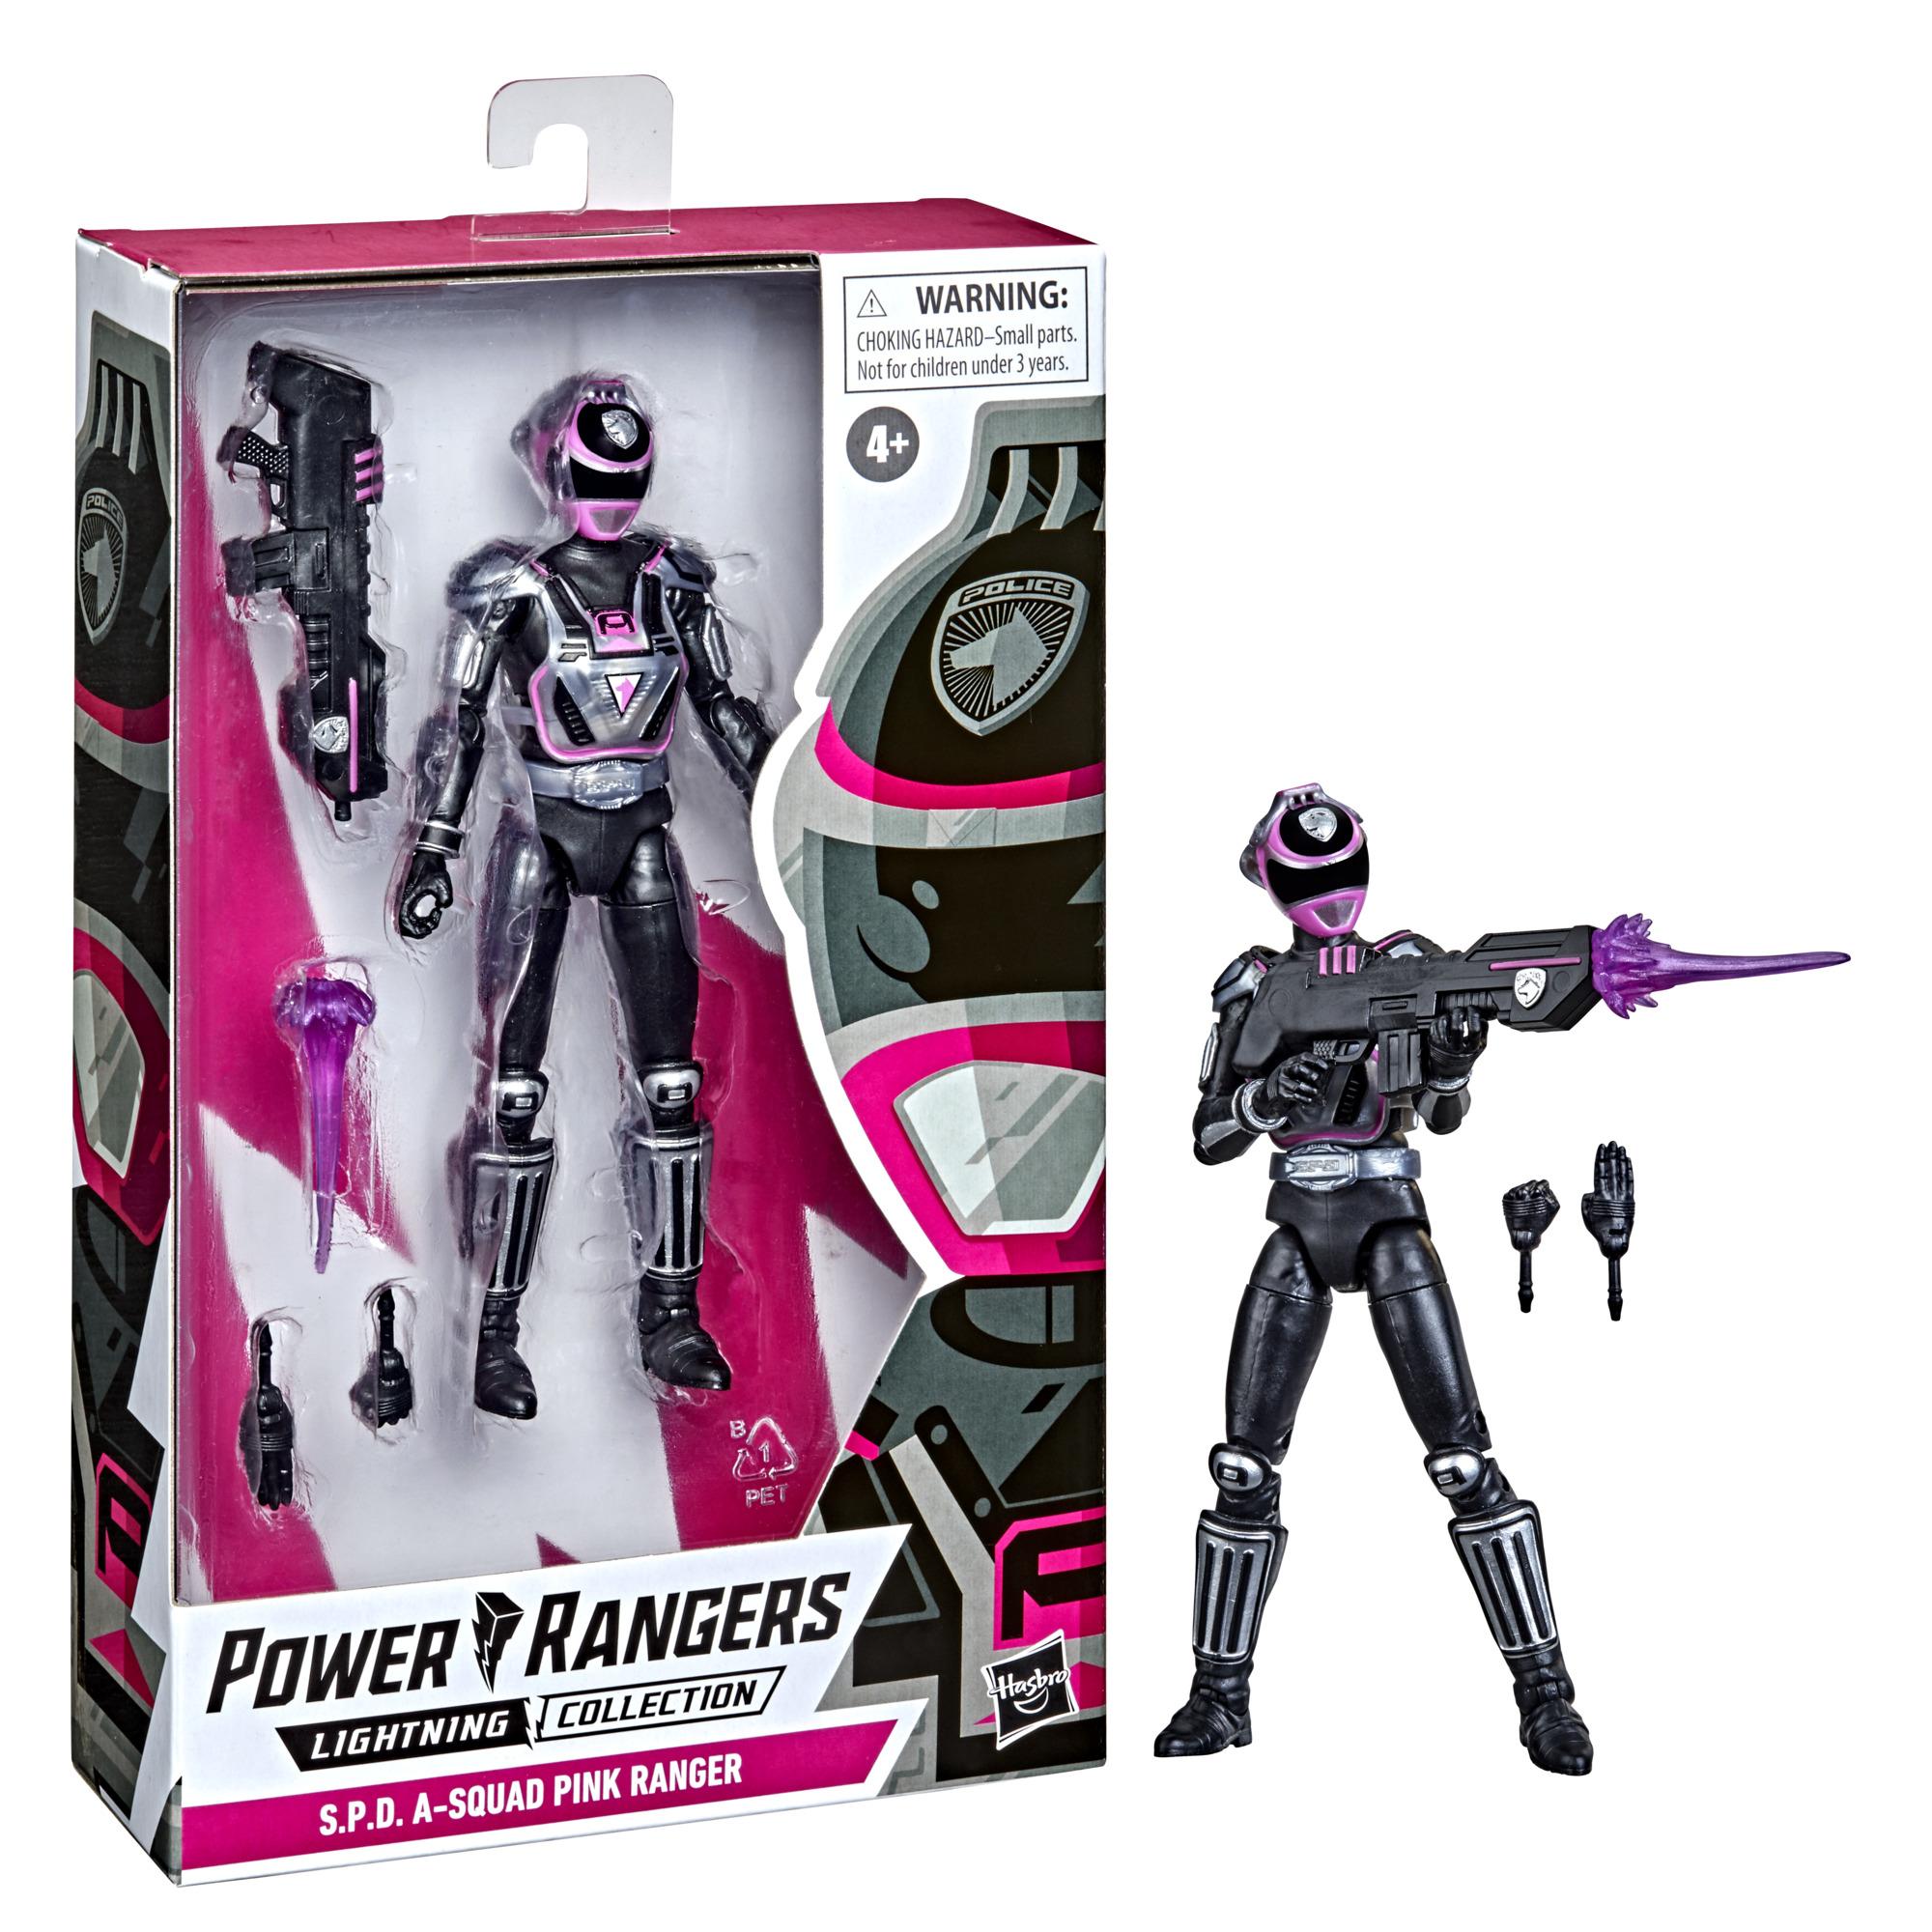 Power Rangers Lightning Collection 6-Inch Figures Wave 10 - S.P.D. A-Squad  Pink Ranger